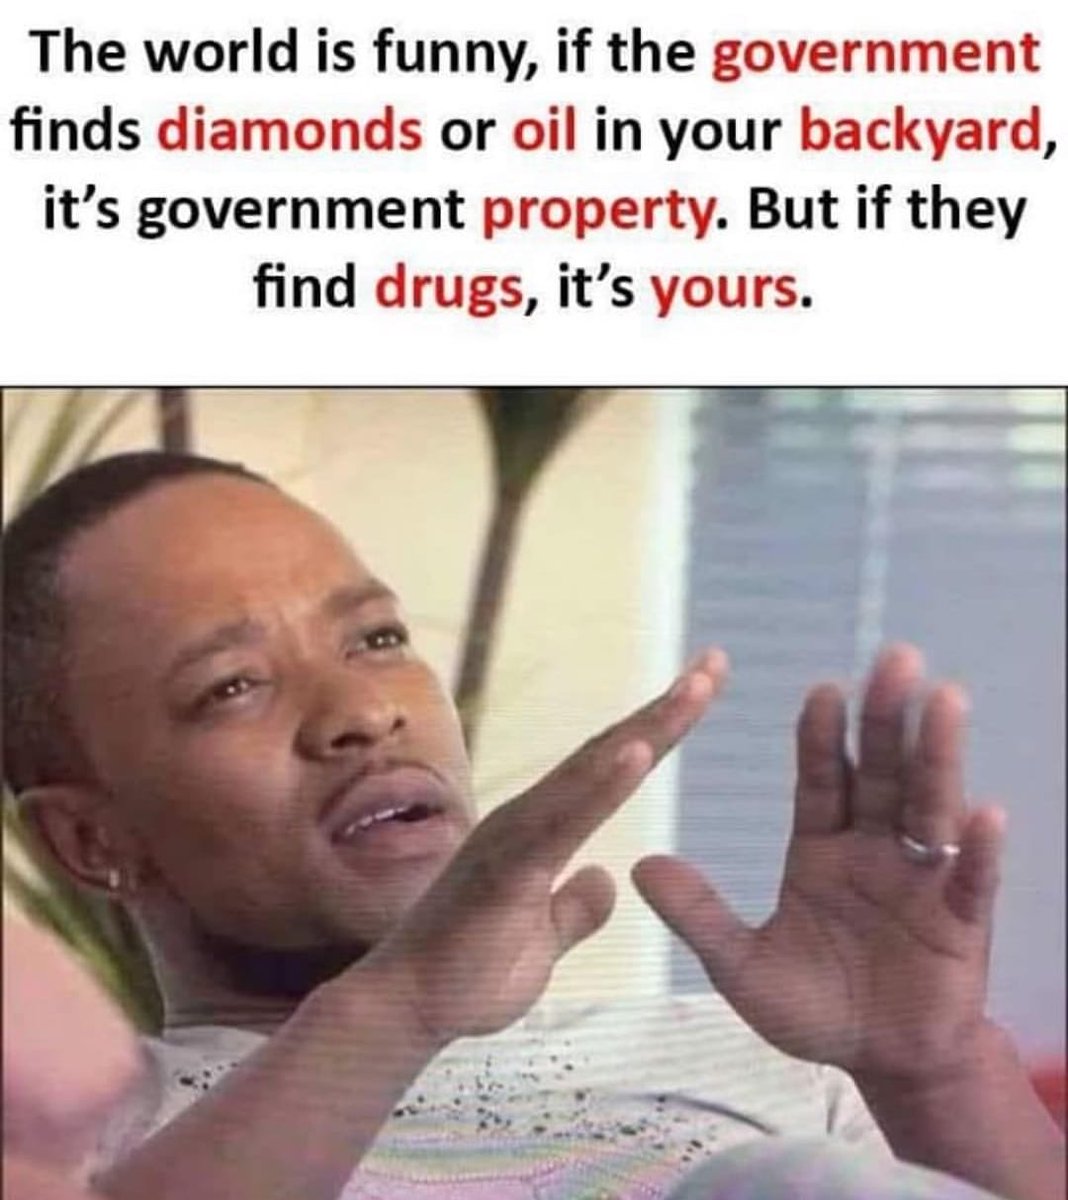 This made me laugh. Laws of man is not always what is best for man. 🙏

#jokes #Mindfulness #propertylaws #funny #drugs #oilfound